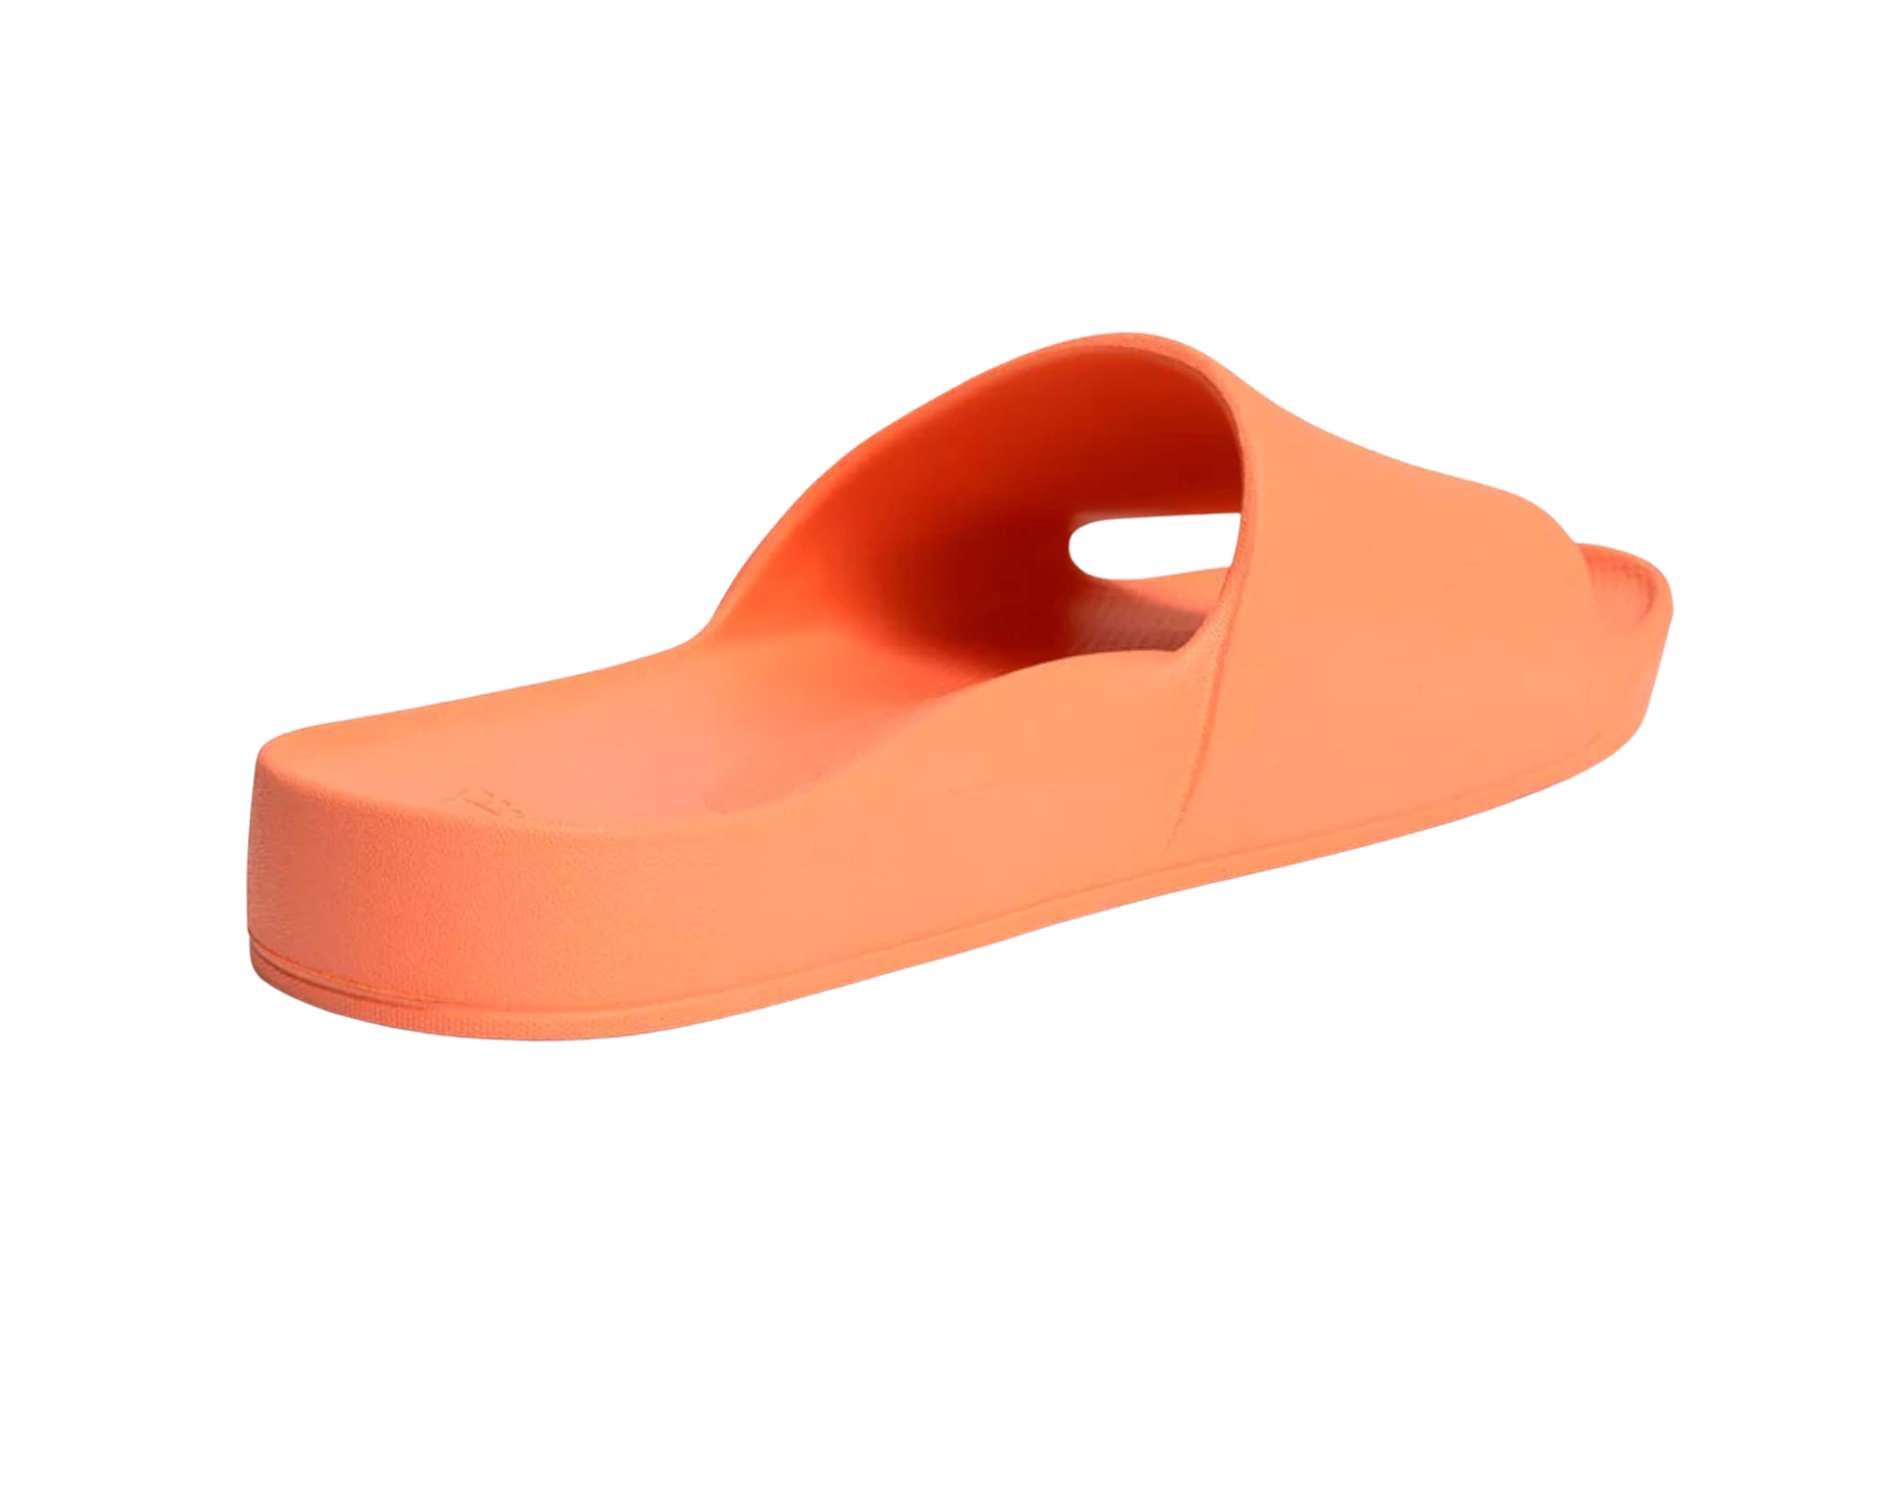 ARCHIES THONGS & SLIDES – Miss Goody 2 Shoes